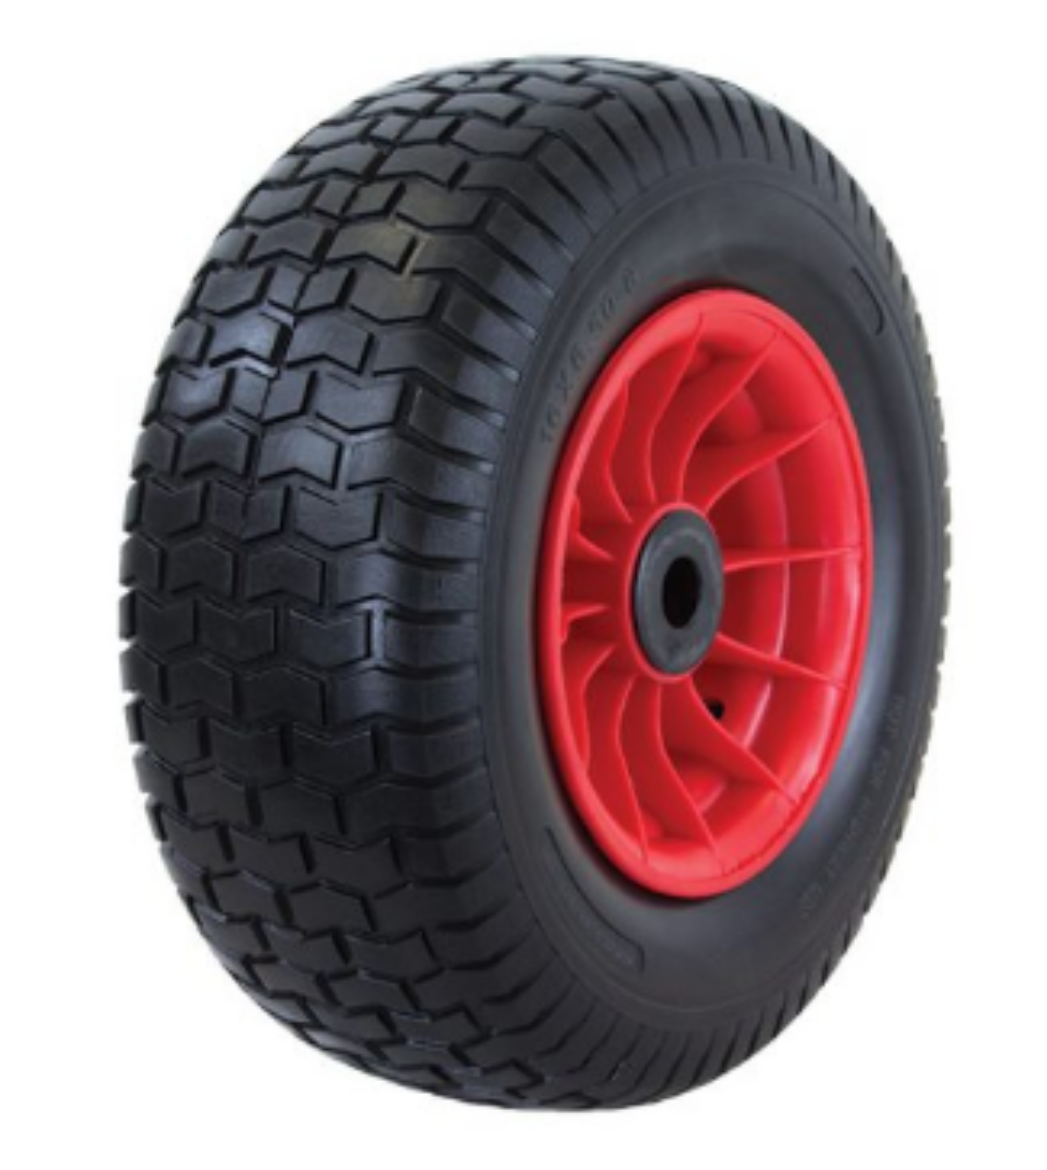 Picture of 400mm Puncture Proof Wheel | 1 Axle Diameter (PF1629-1)